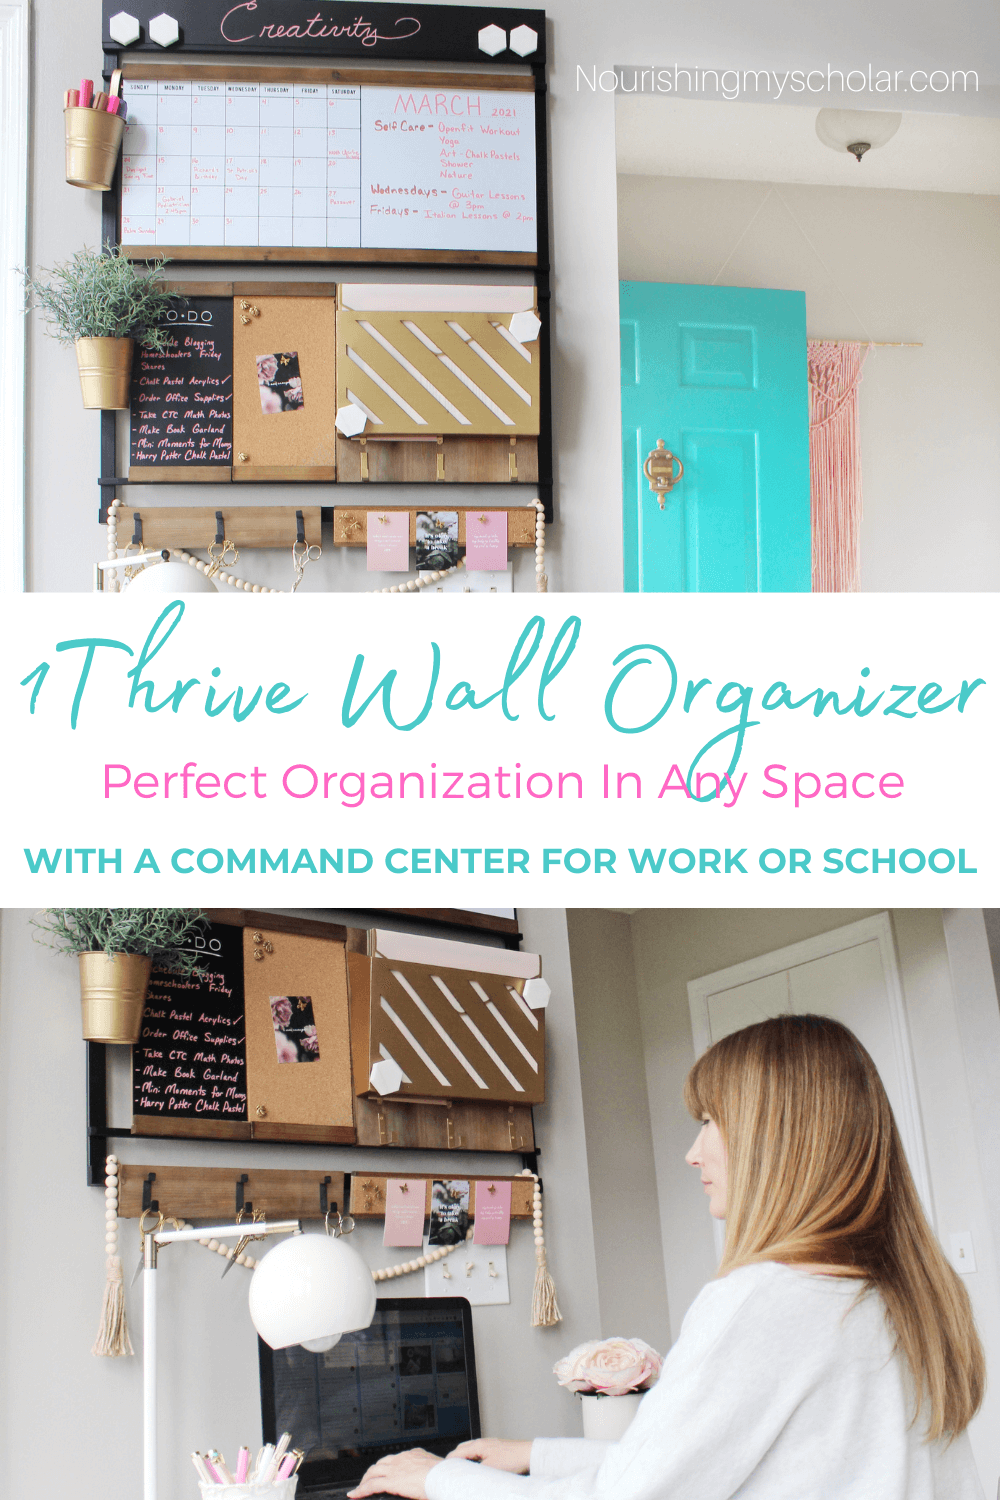 Getting Organized with a 1Thrive Wall Organizer: If your looking for a wall organizer for your home office, homeschool space, or family space then check out my review of 1Thrive's Susan command center! It is perfect for organizing schedules, papers, documents, and more! #commandcenter #familyorganization #familywallorganizer #homeoffice #homeschoolwallorganizer #officespacerefresh #officespaceupdate #officewallorganizer #organization #organizationideas #organizedhome #wallorganization